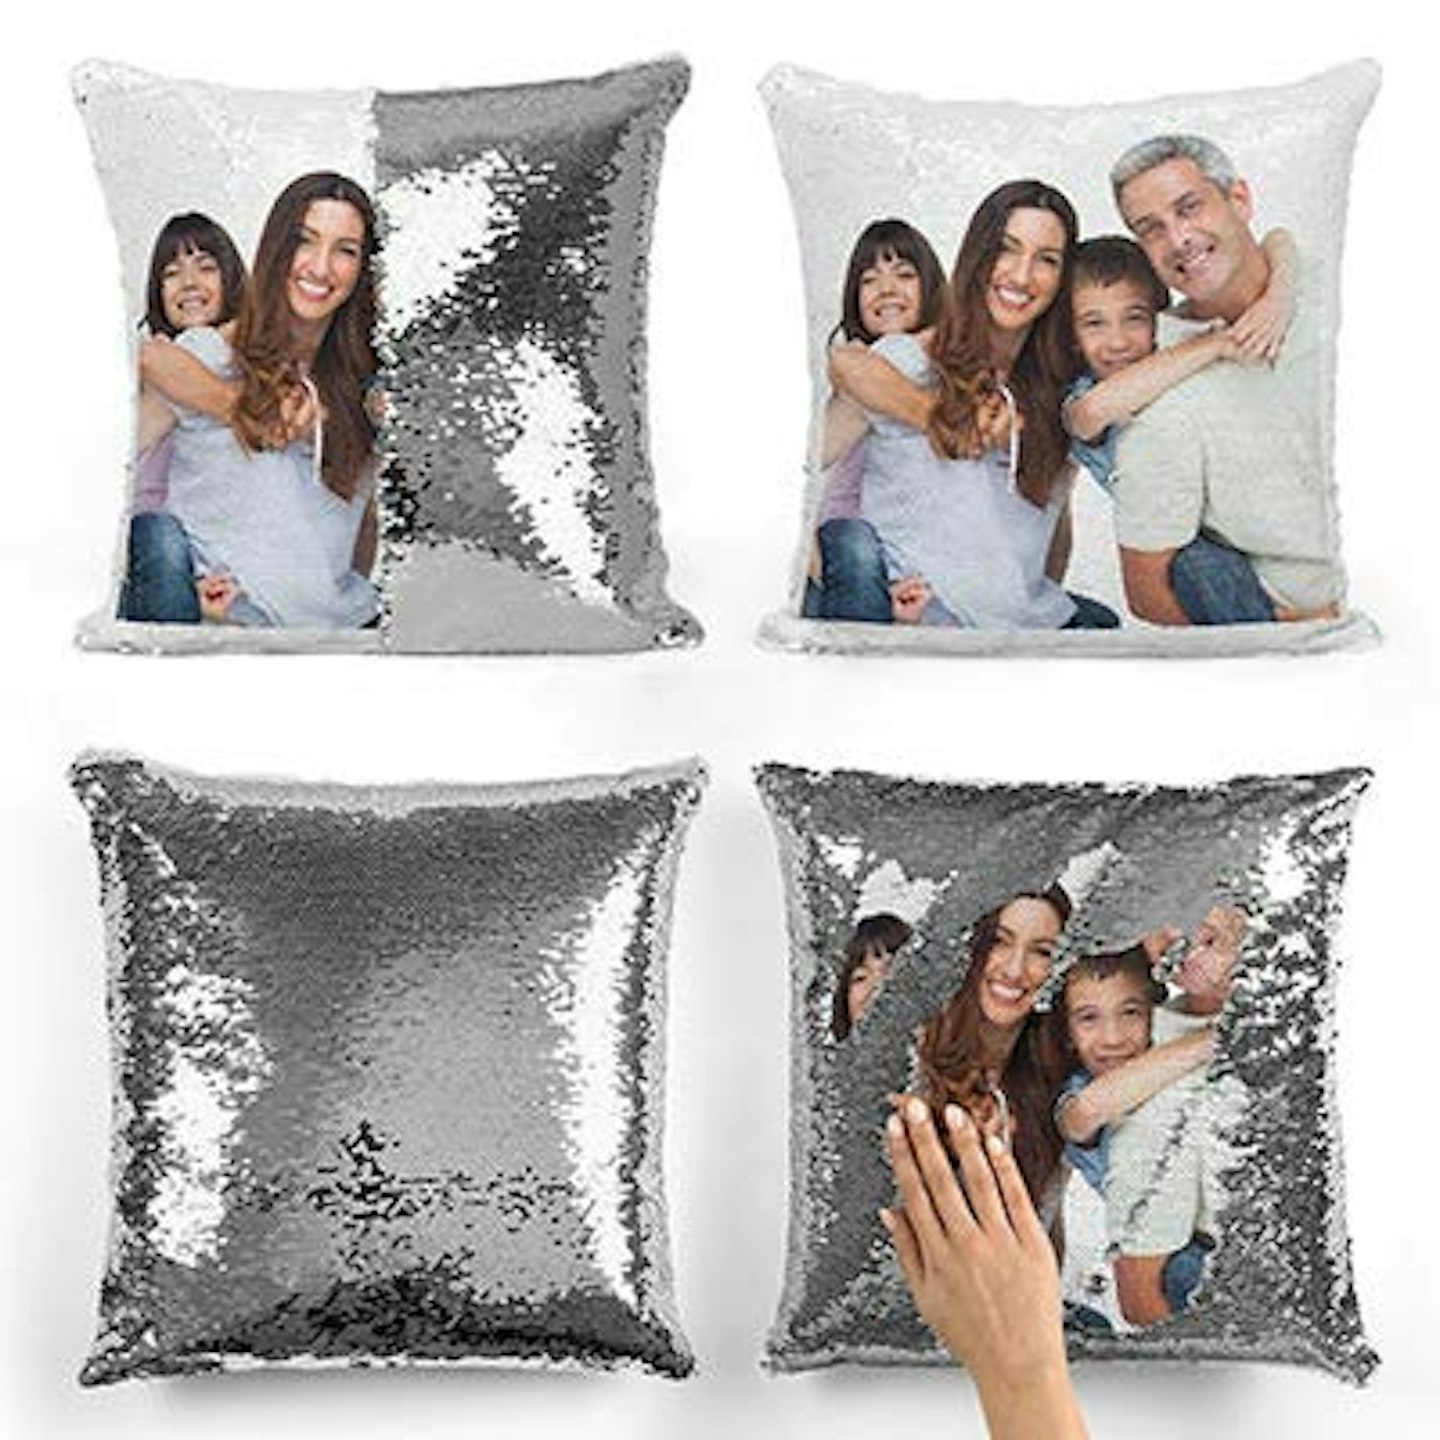 Print Manics Personalised Silver Sequin Cushion Cover